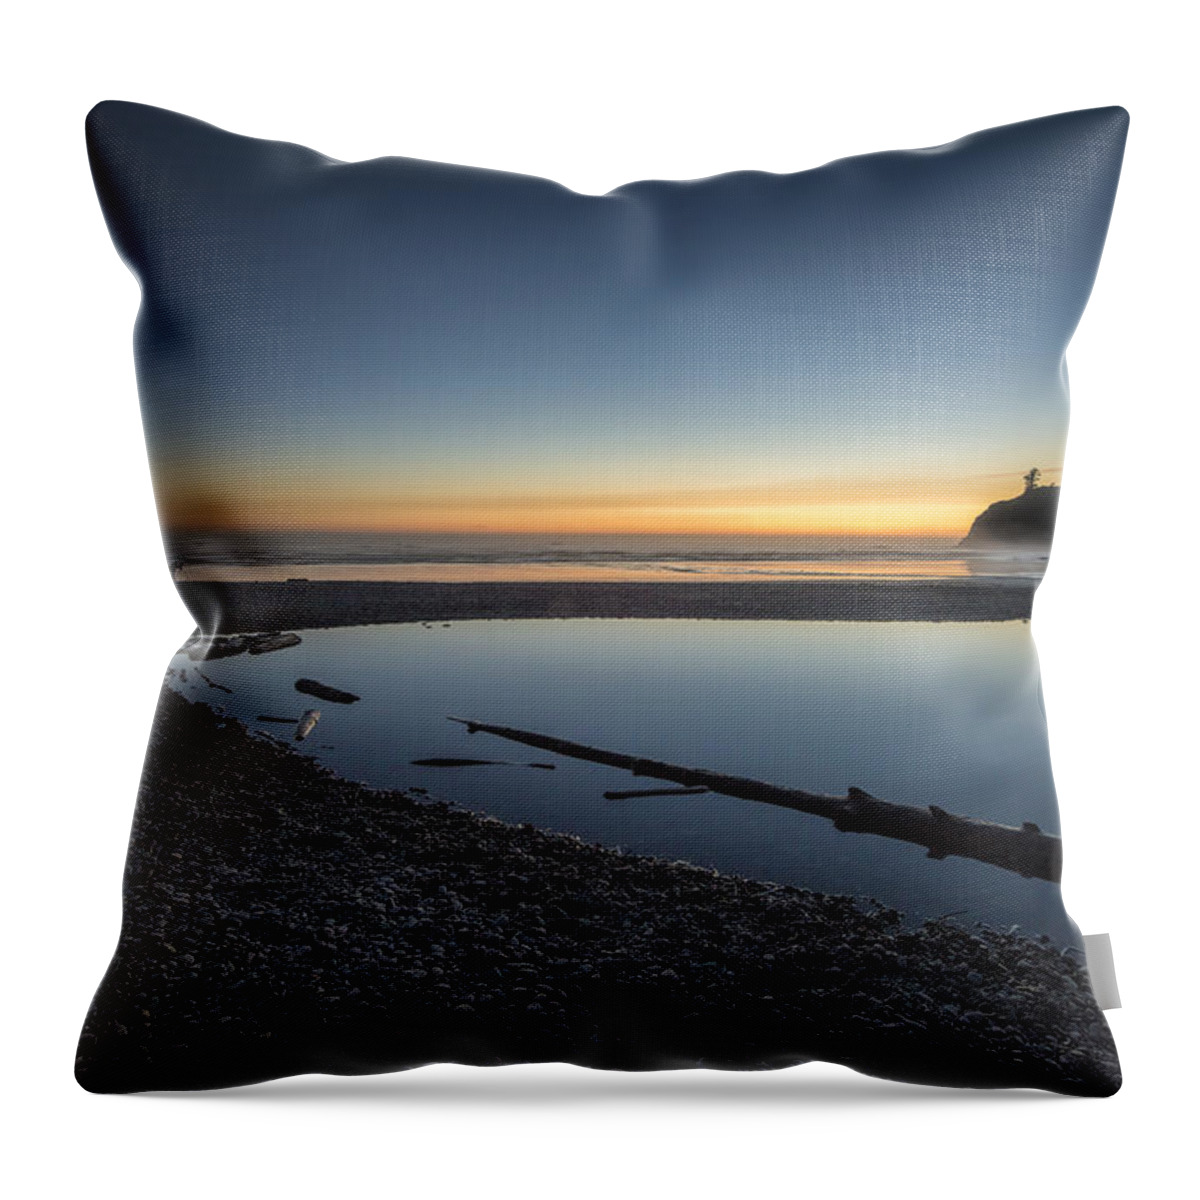 Art Throw Pillow featuring the photograph I Remember Now by Jon Glaser